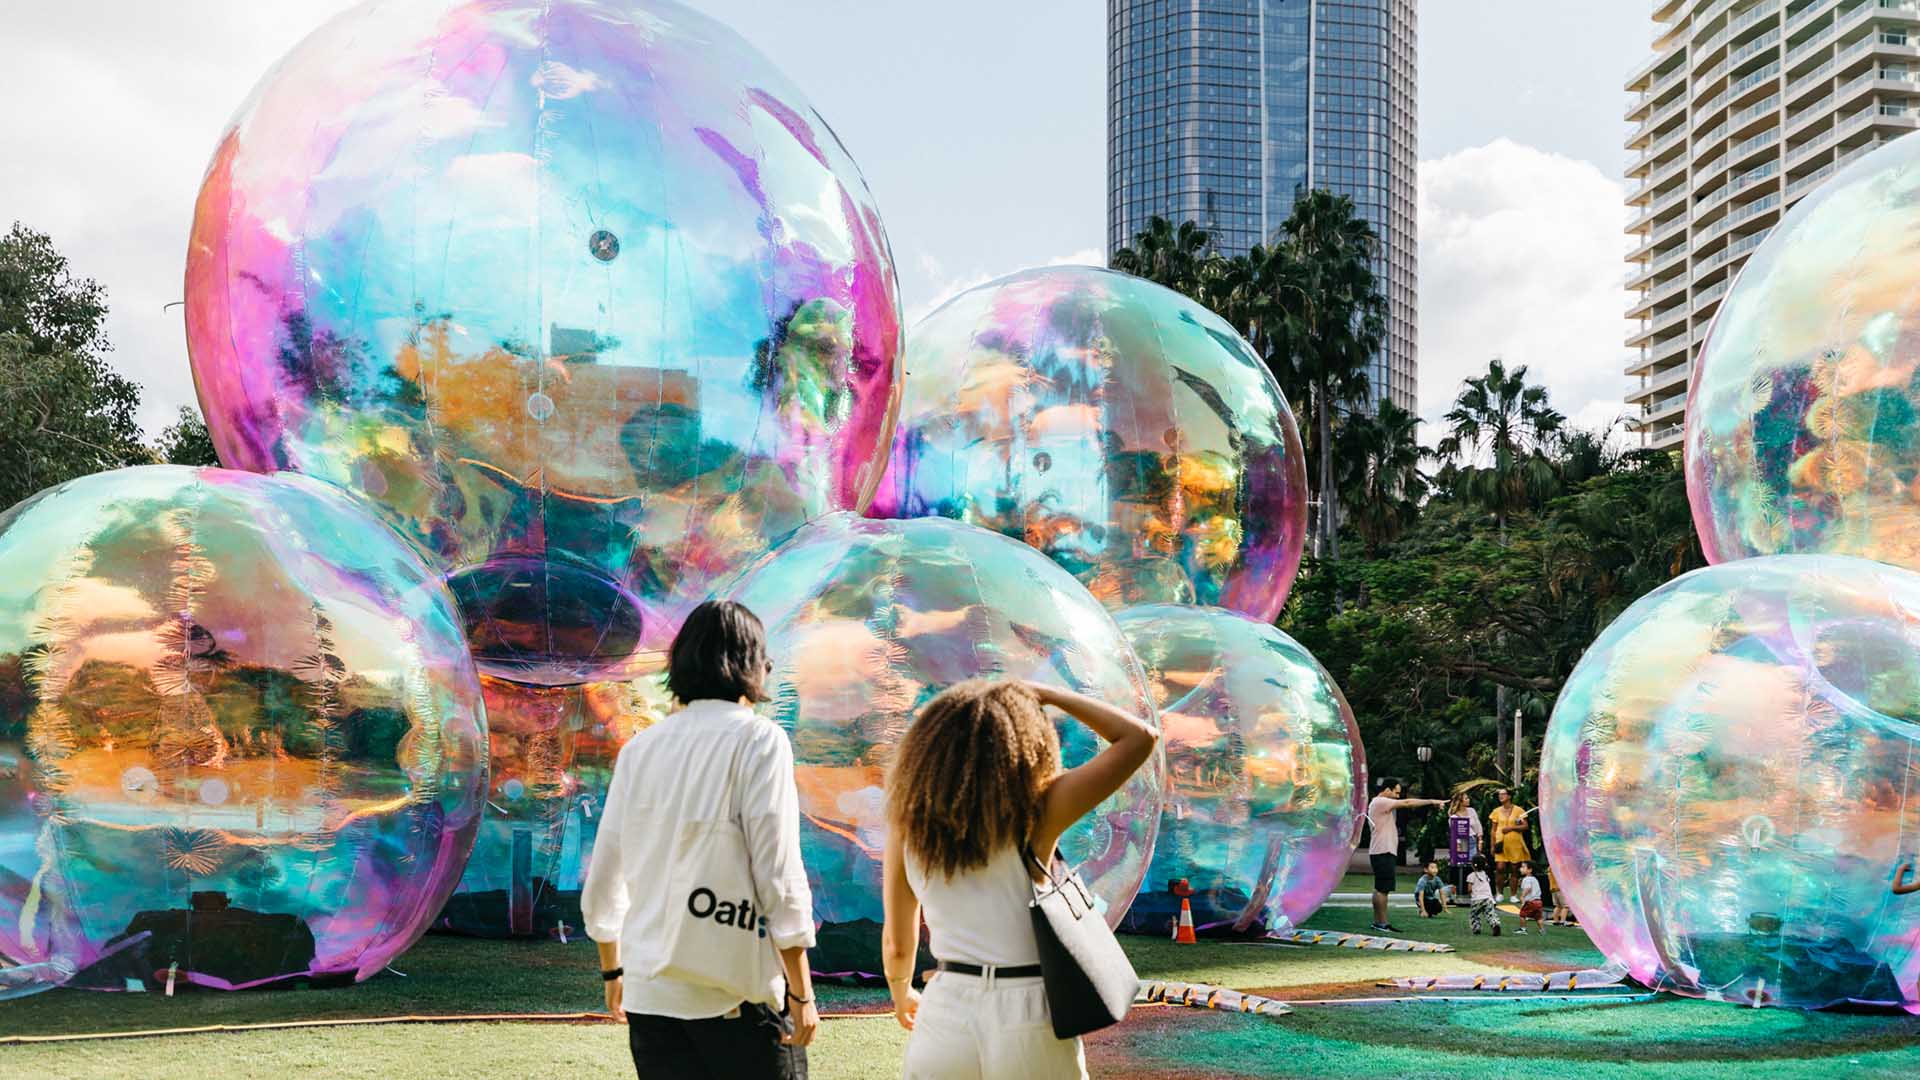 World Science Festival Brisbane Has Unveiled Its Jam-Packed 2022 Program with More Than 130 Events